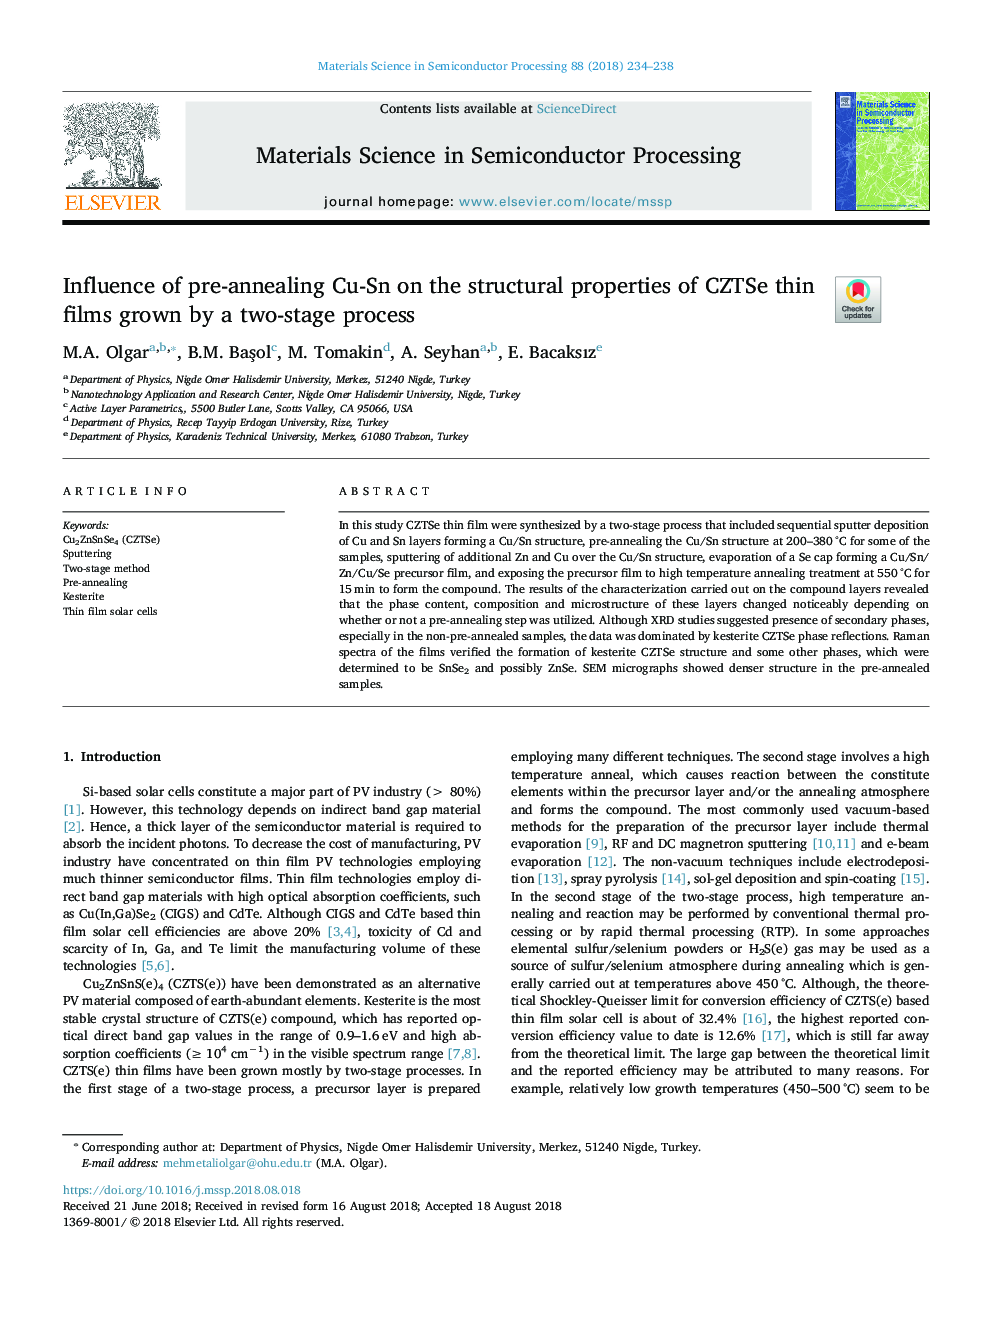 Influence of pre-annealing Cu-Sn on the structural properties of CZTSe thin films grown by a two-stage process